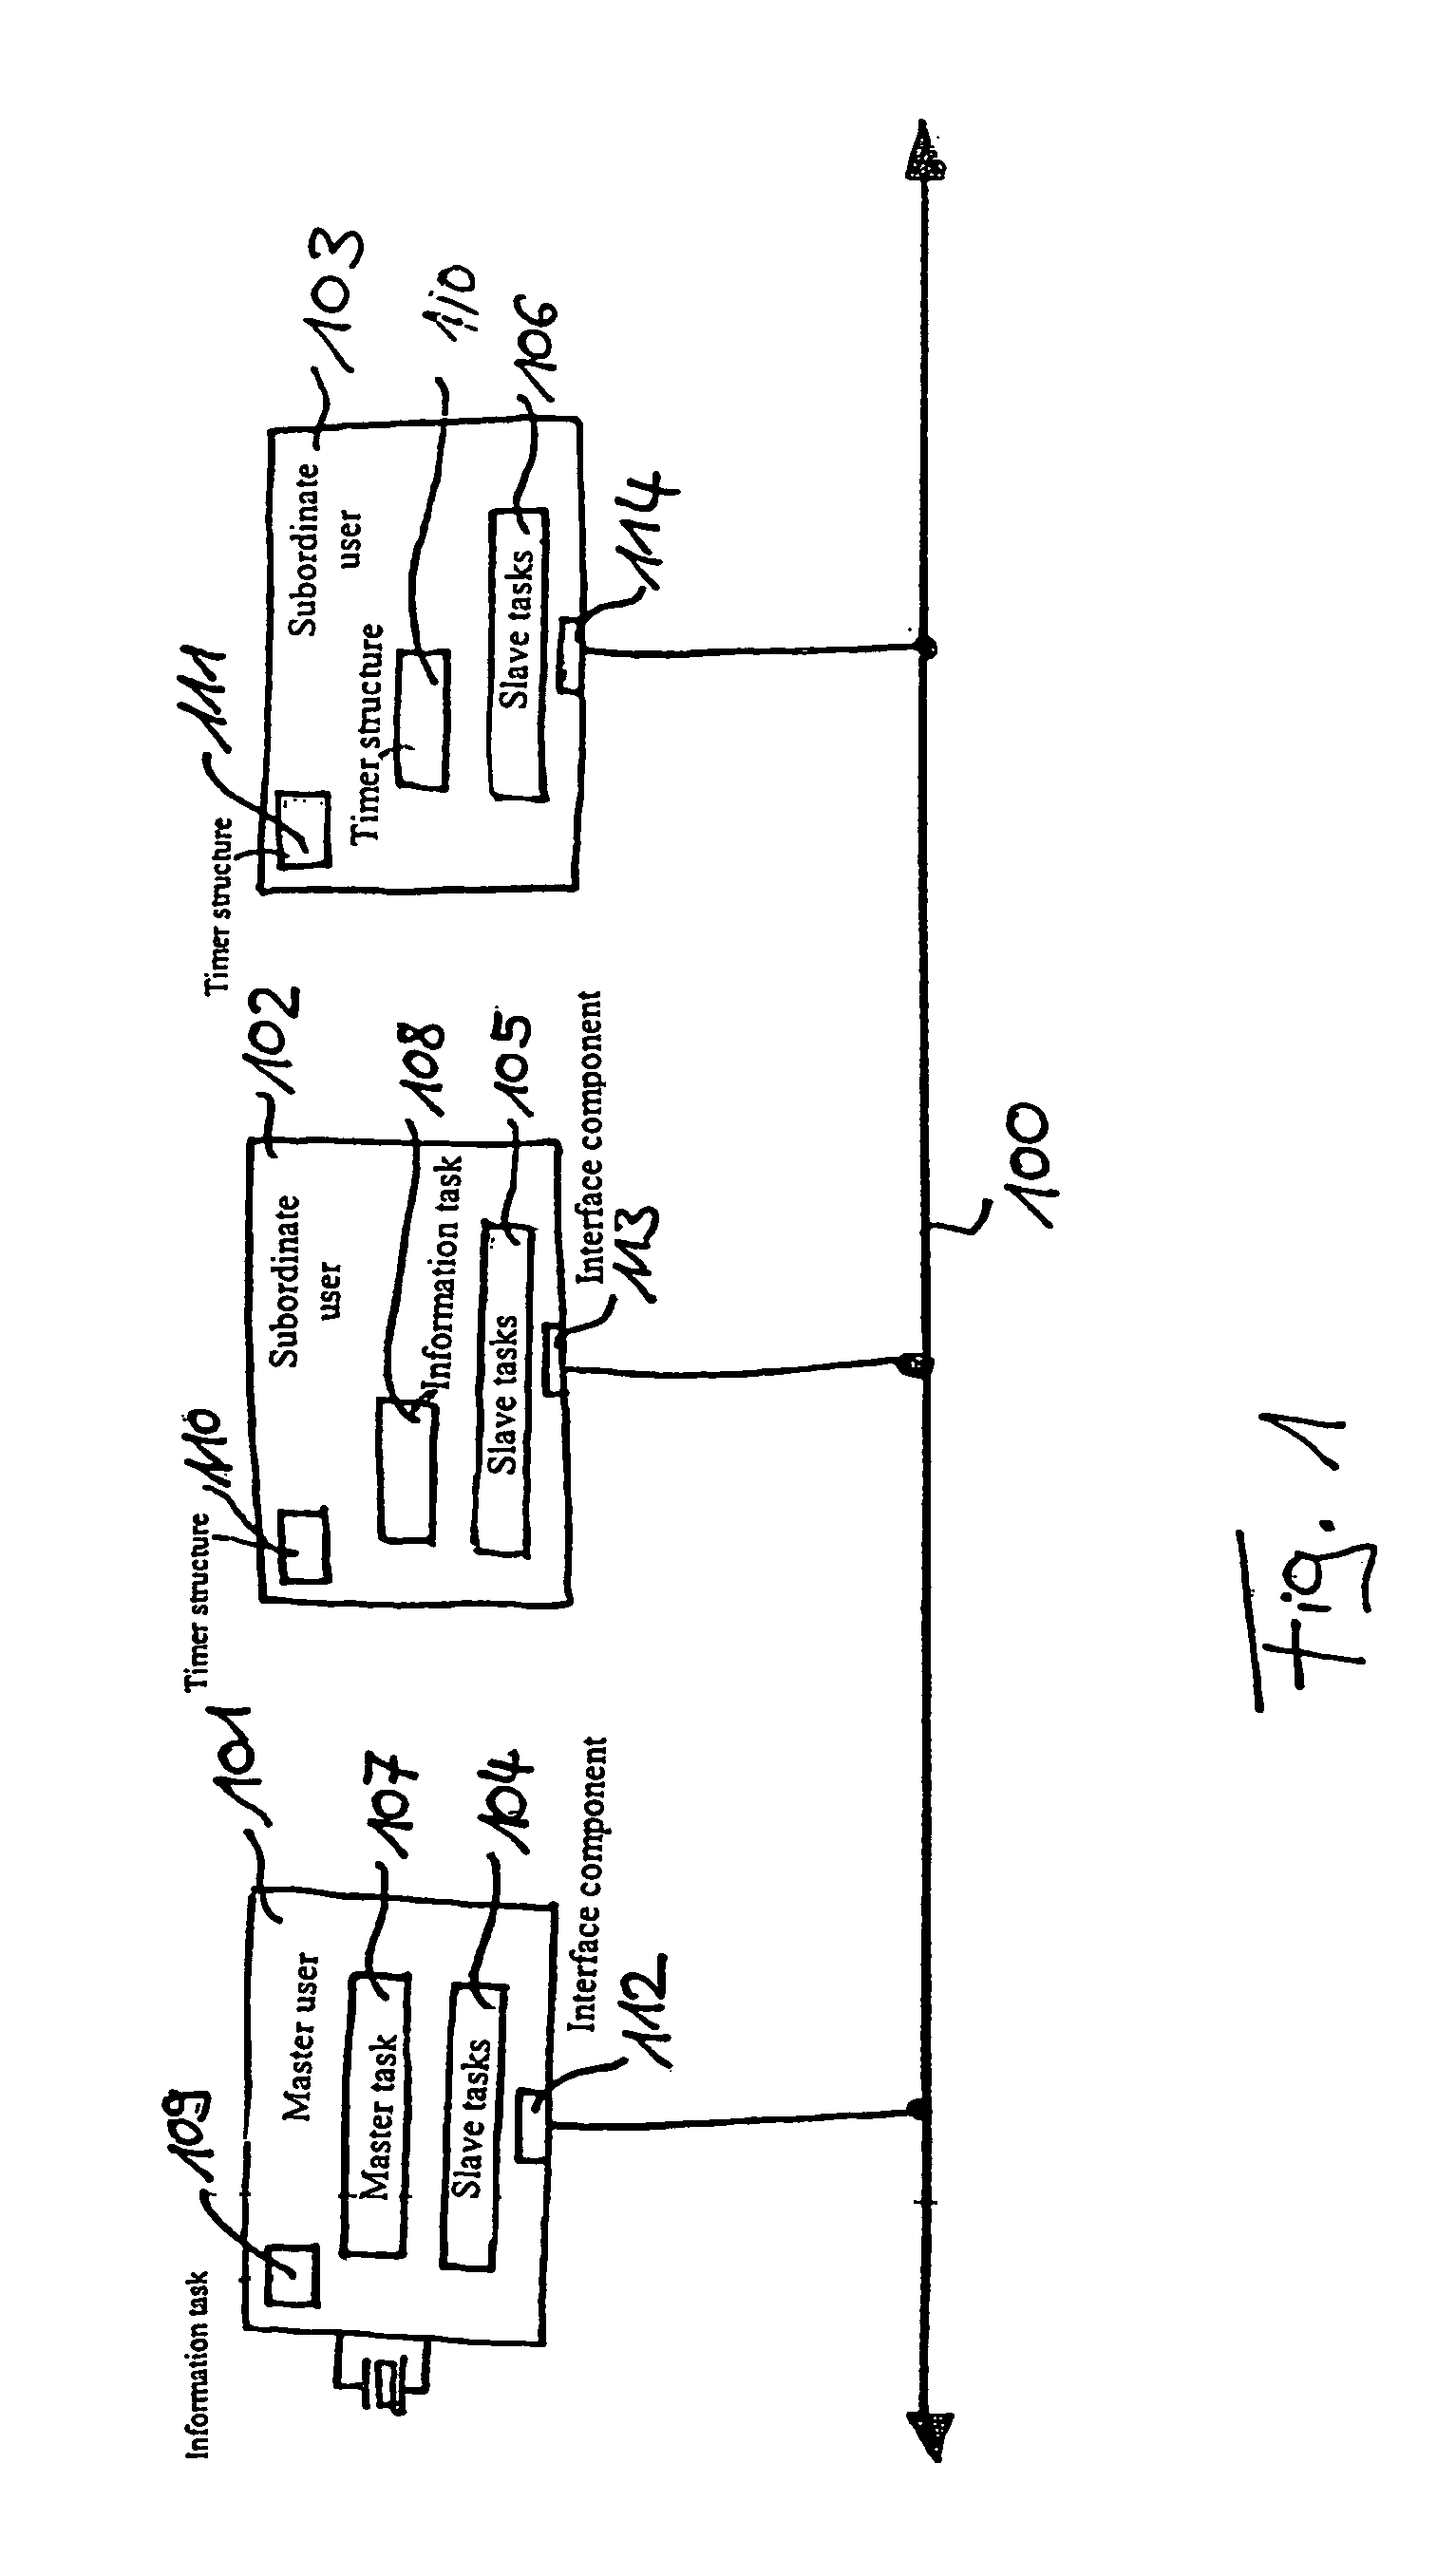 Method and device for transmitting information on a bus system, and a bus system in which different information is uniquely assigned different information identifiers